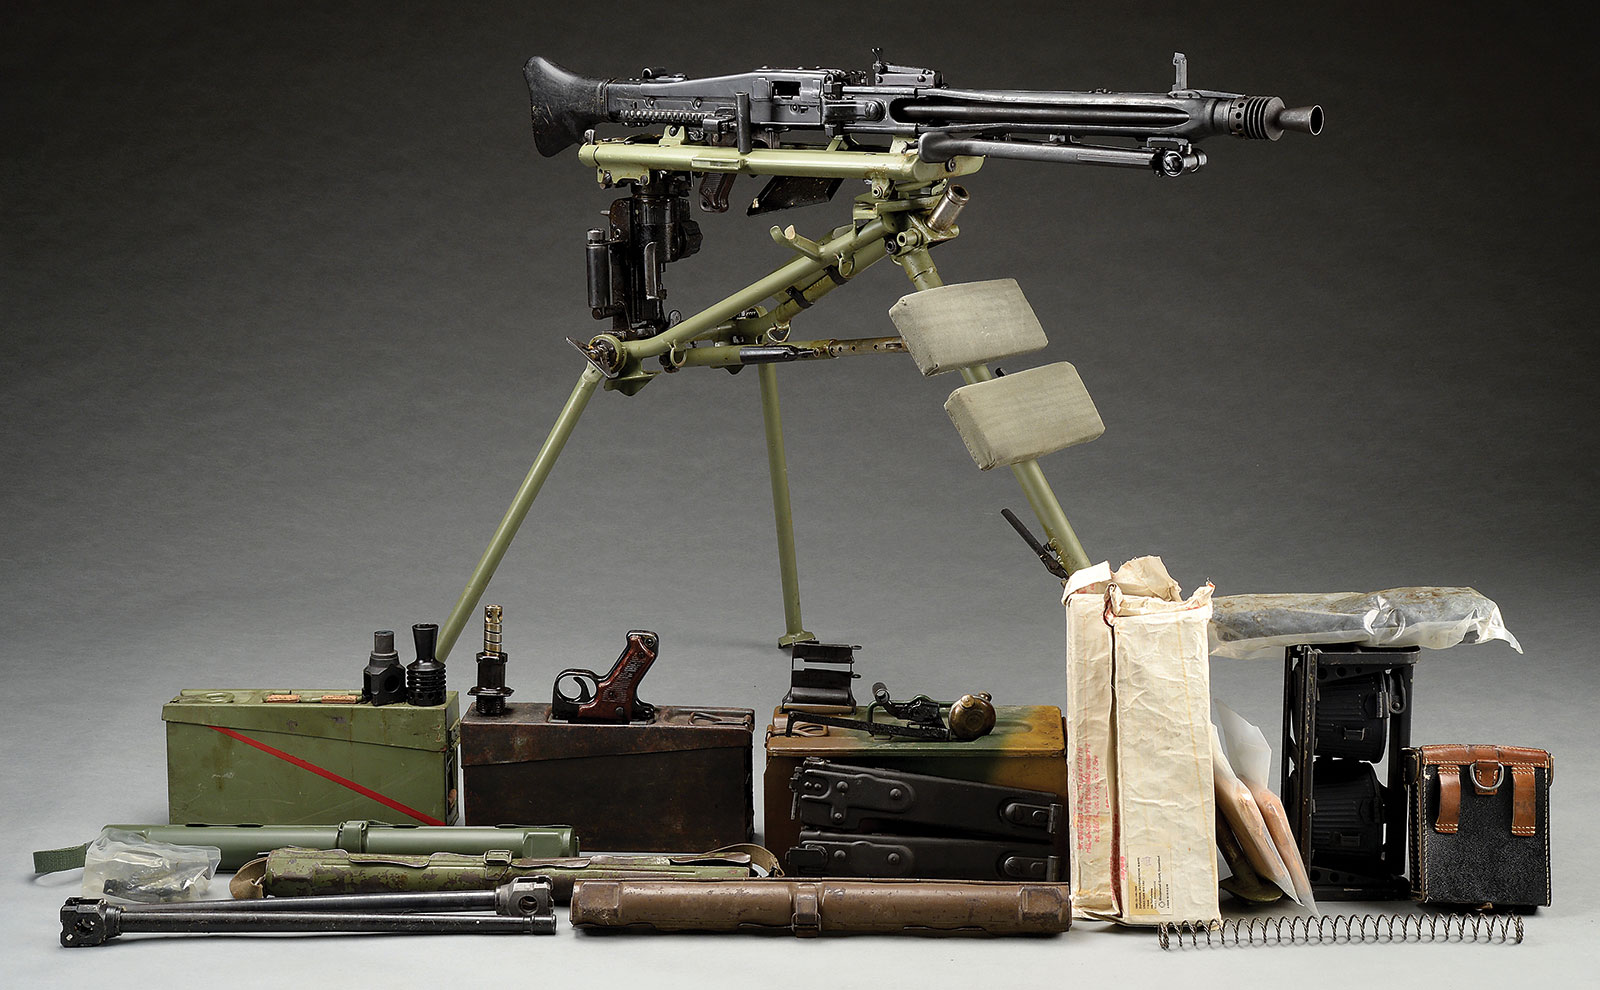 Mauser Manufactured WWII German MG42 Machine Gun on Lafette Mount with Accessories, estimated at $30,000-40,000.